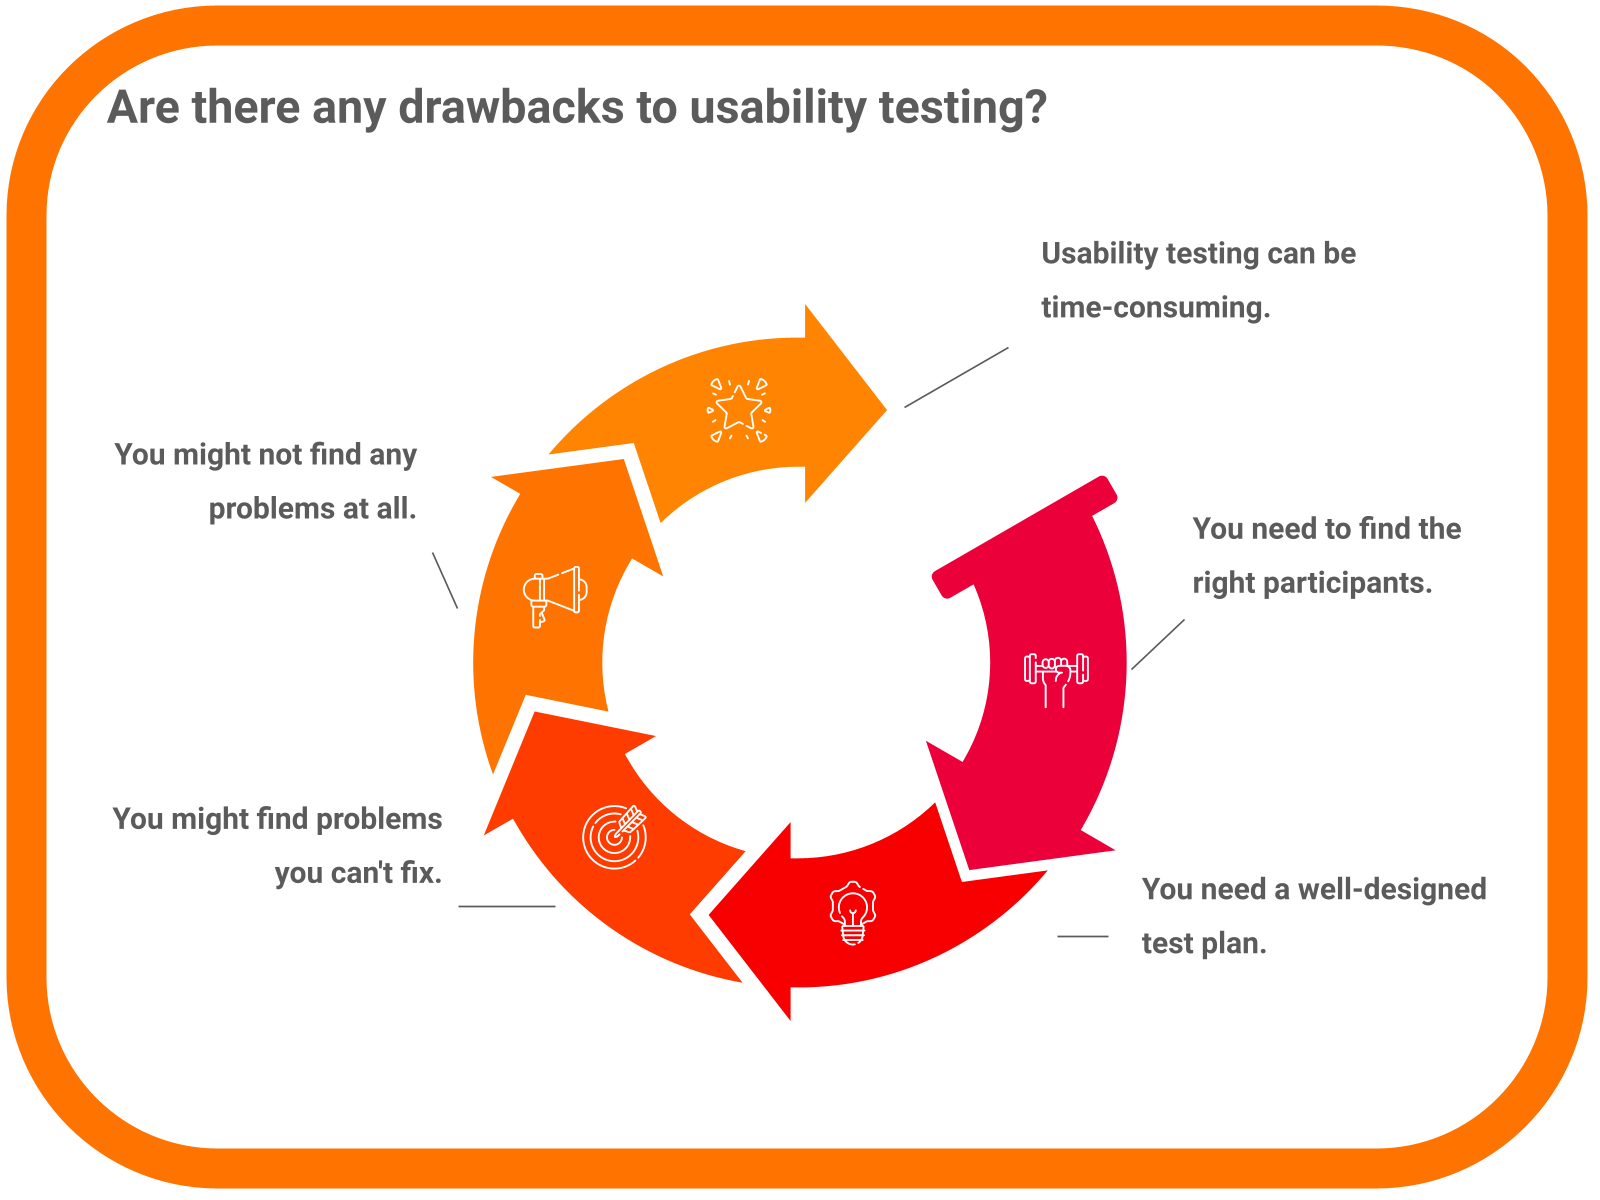 Are there any drawbacks to usability testing?